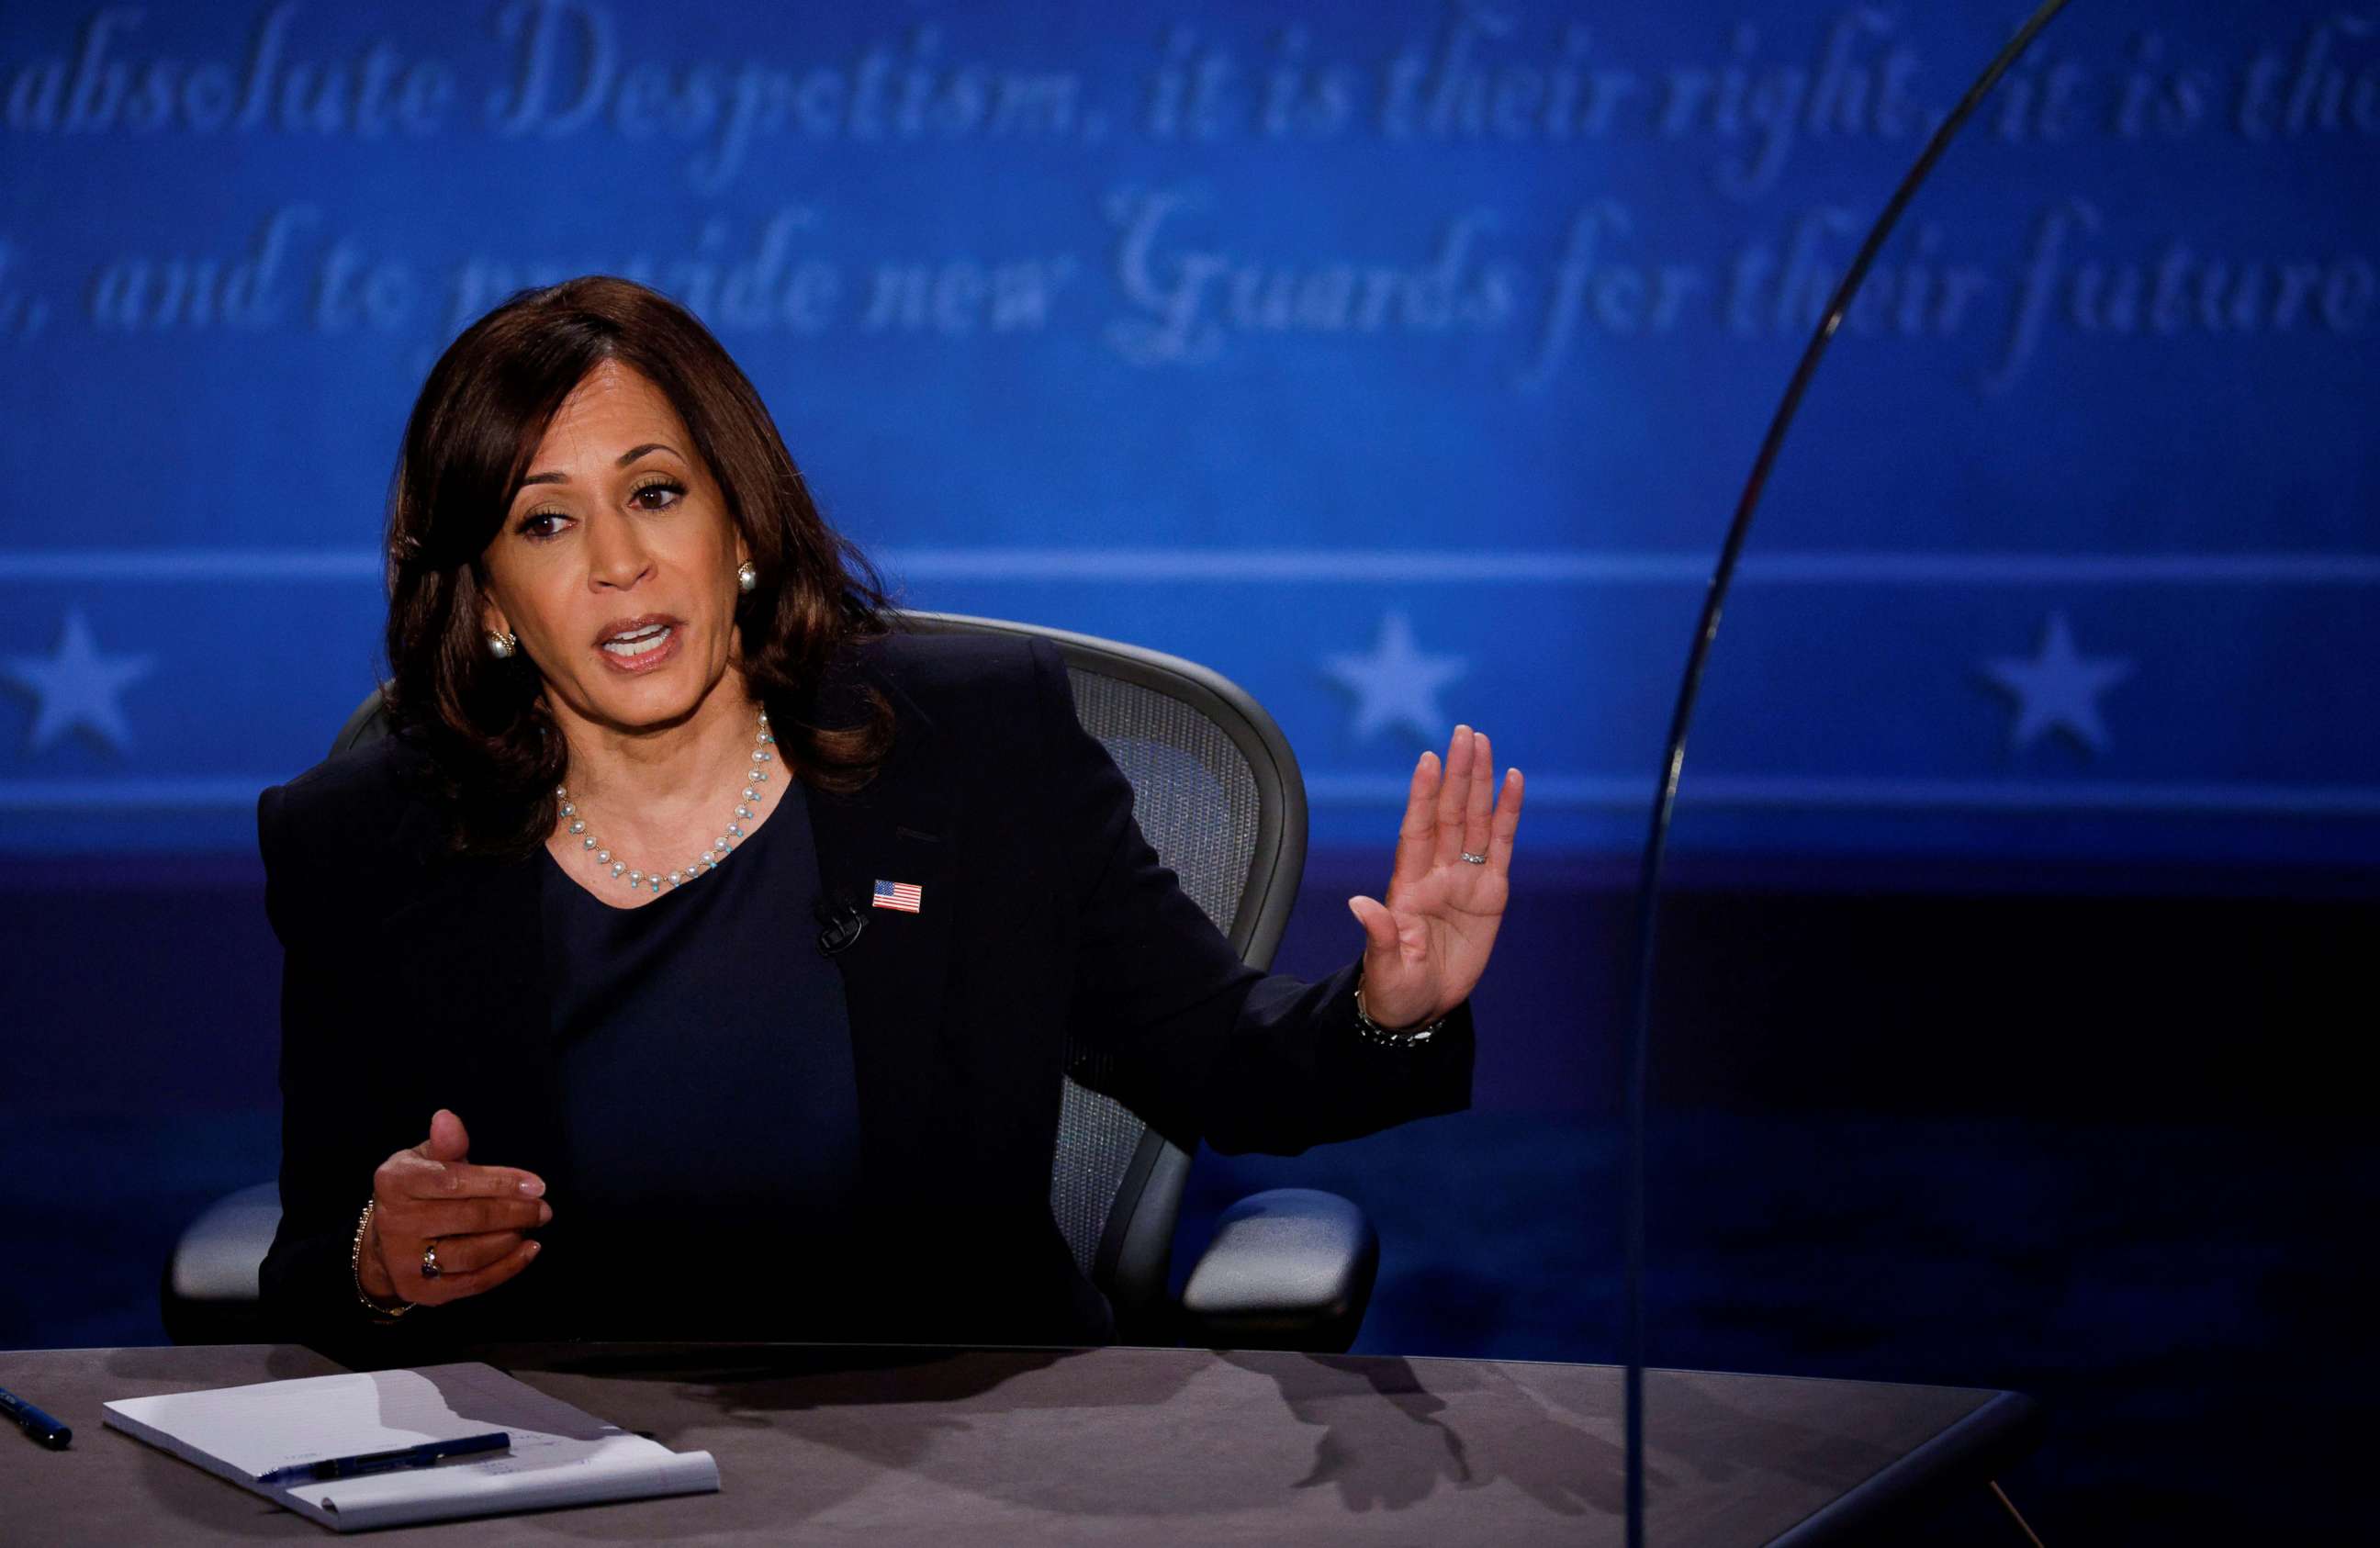 PHOTO: Democratic vice presidential nominee Senator Kamala Harris speaks during the vice presidential campaign debate with Vice President Mike Pence held on the campus of the University of Utah in Salt Lake City, Oct. 7, 2020.